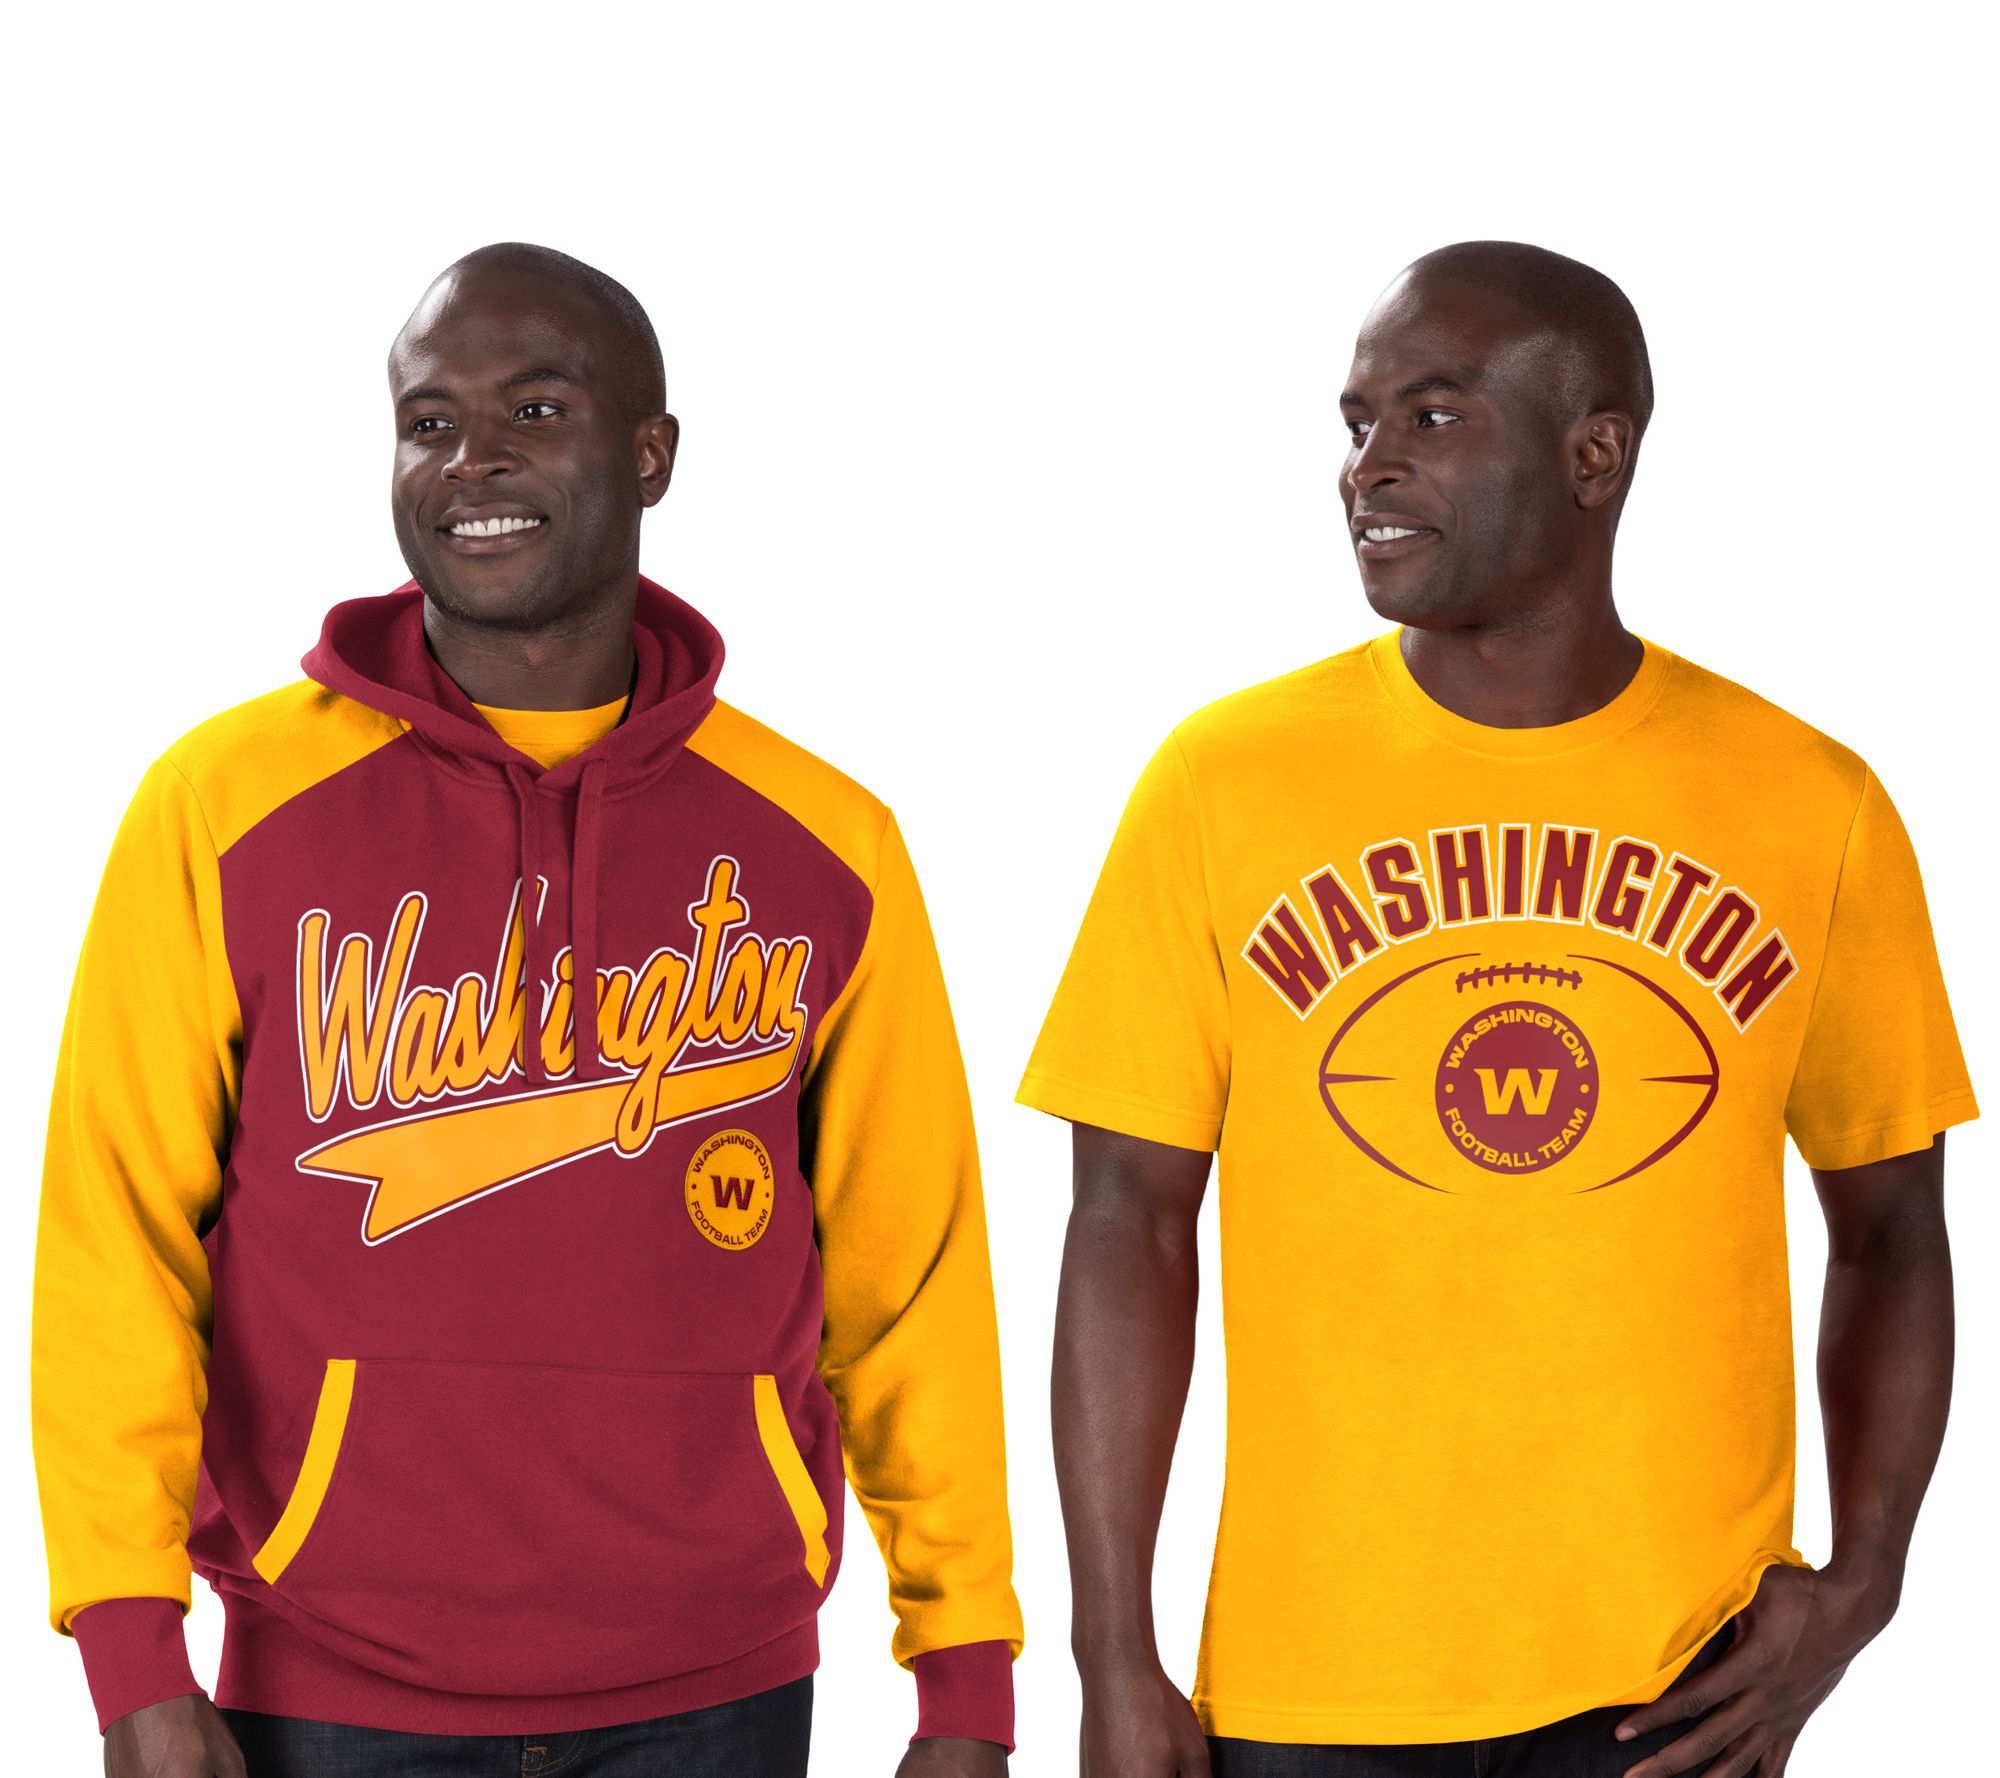 NFL Washington Pullover Hoodie and T-Shirt Combo 